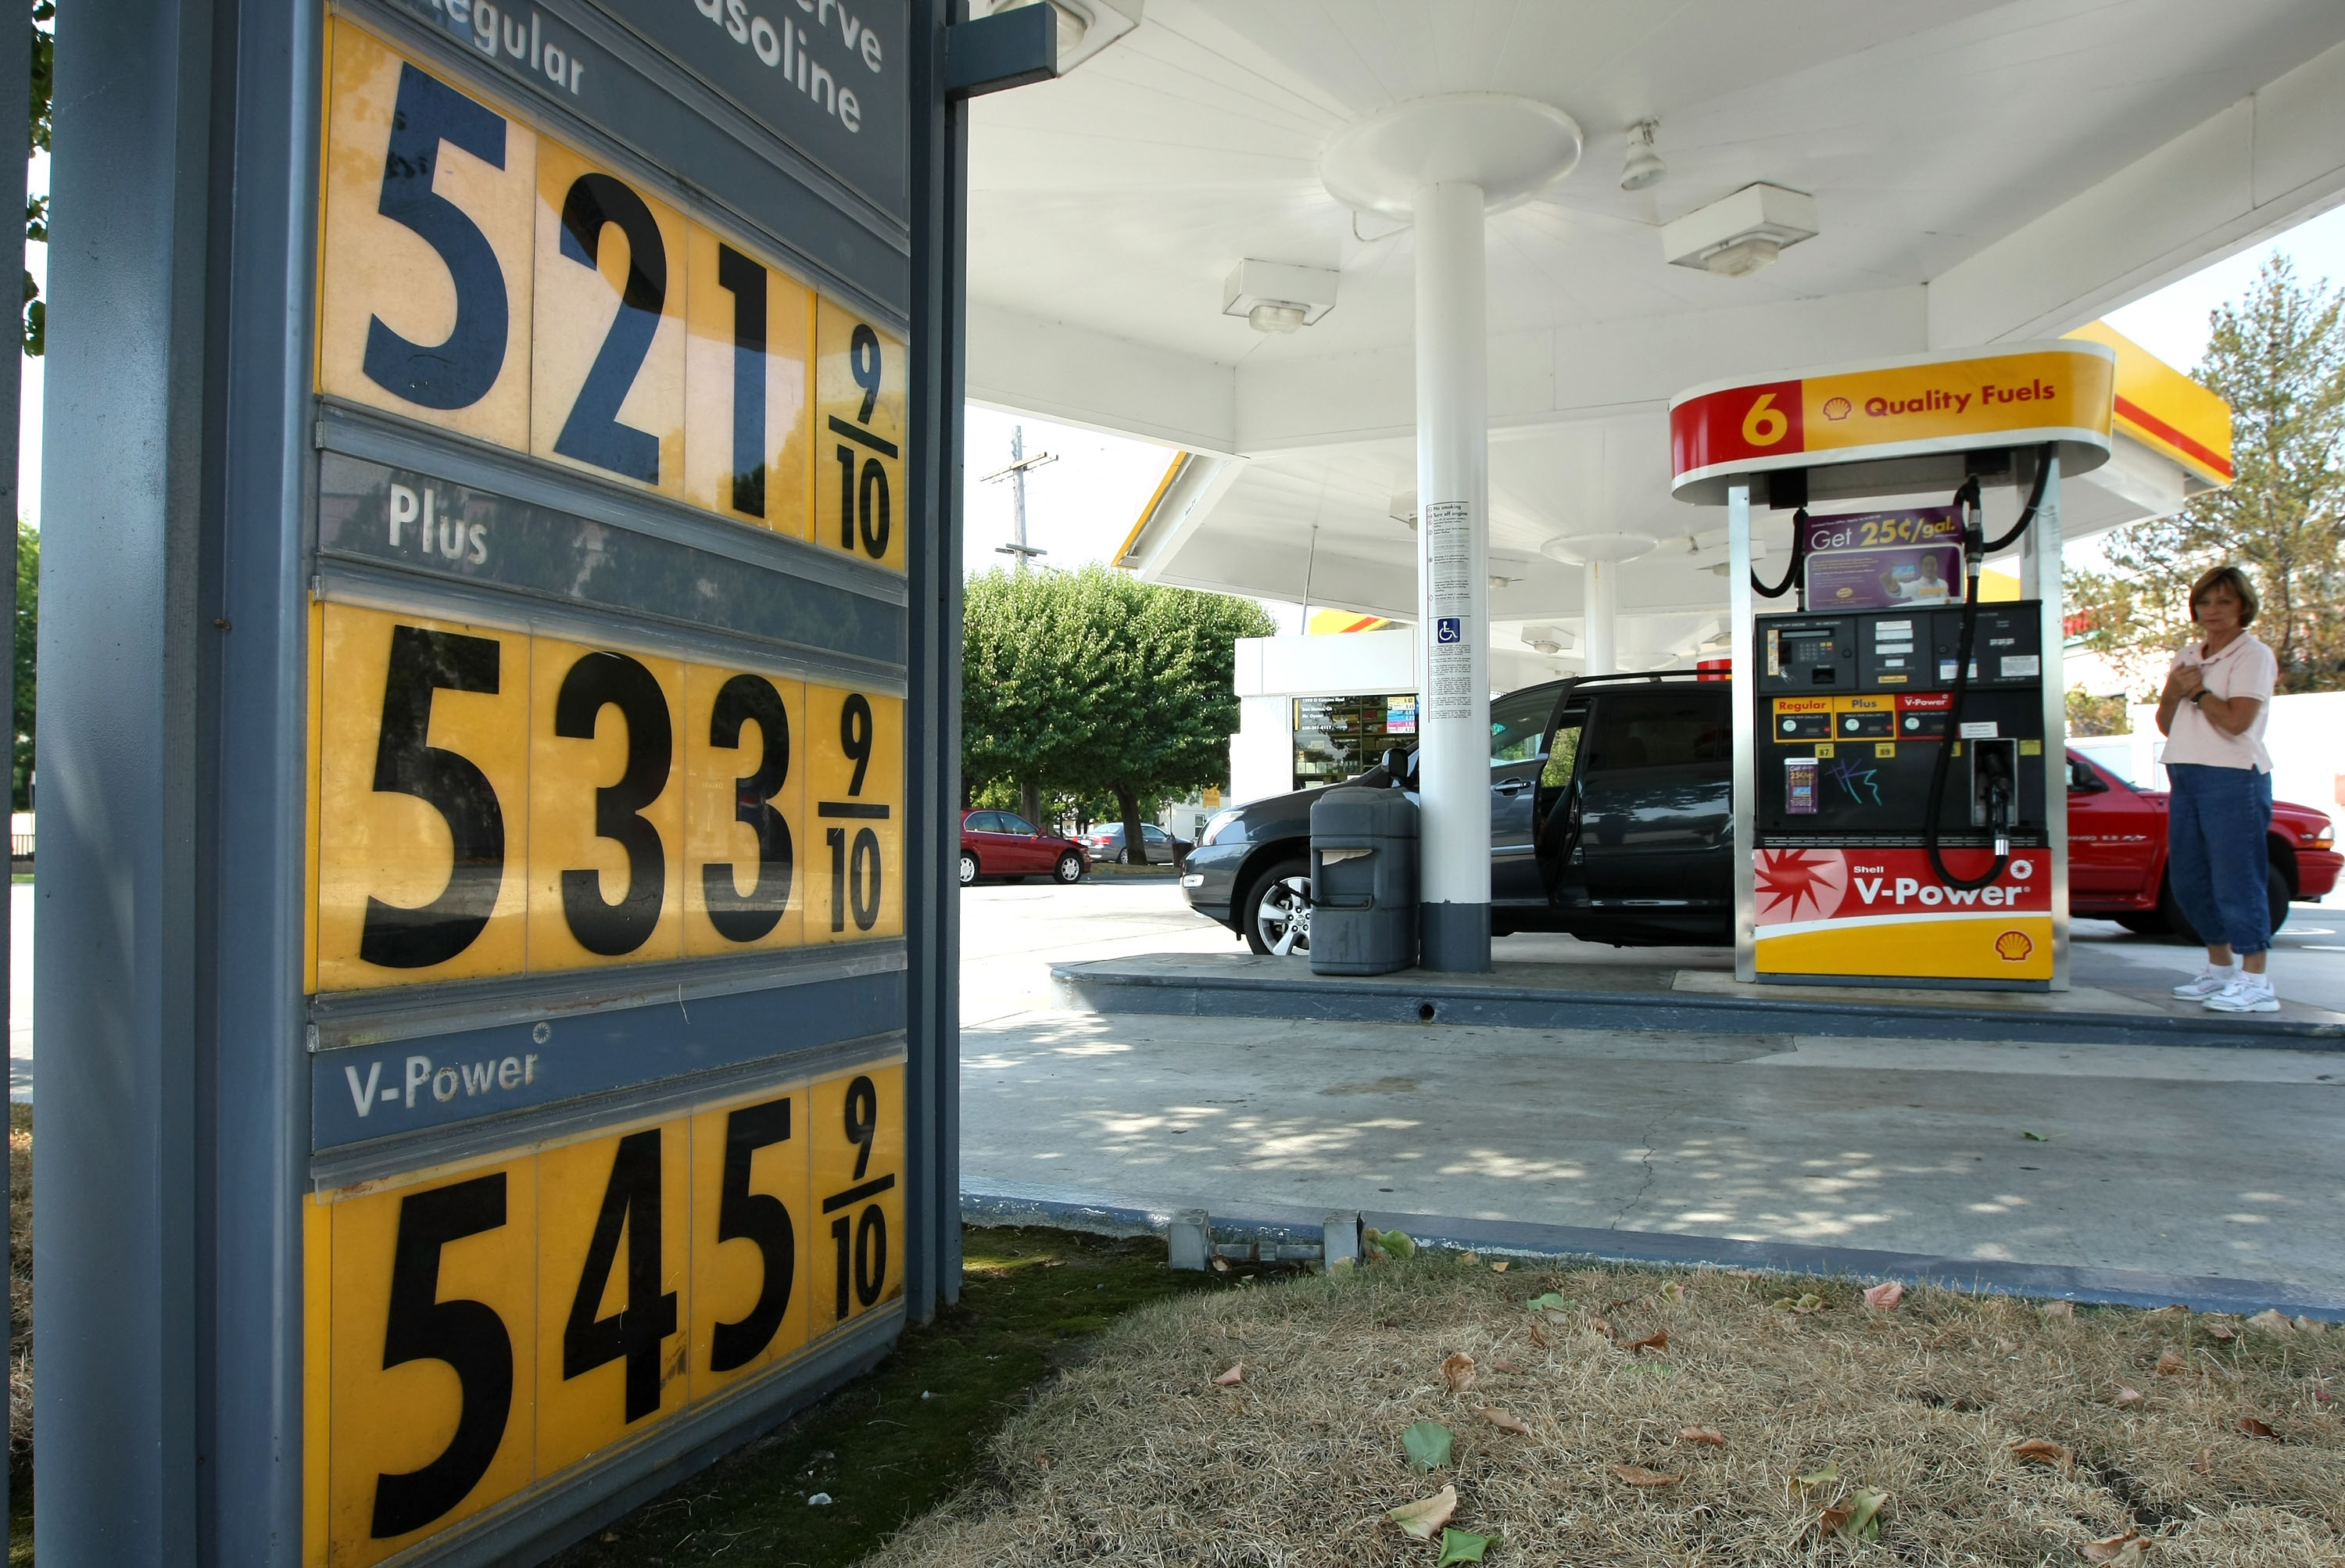 SAN MATEO, CA - JUNE 23: Gasoline prices over $5.00 per gallon are displayed at a Shell station June 23, 2008 in San Mateo, California. (Photo by Justin Sullivan/Getty Images)